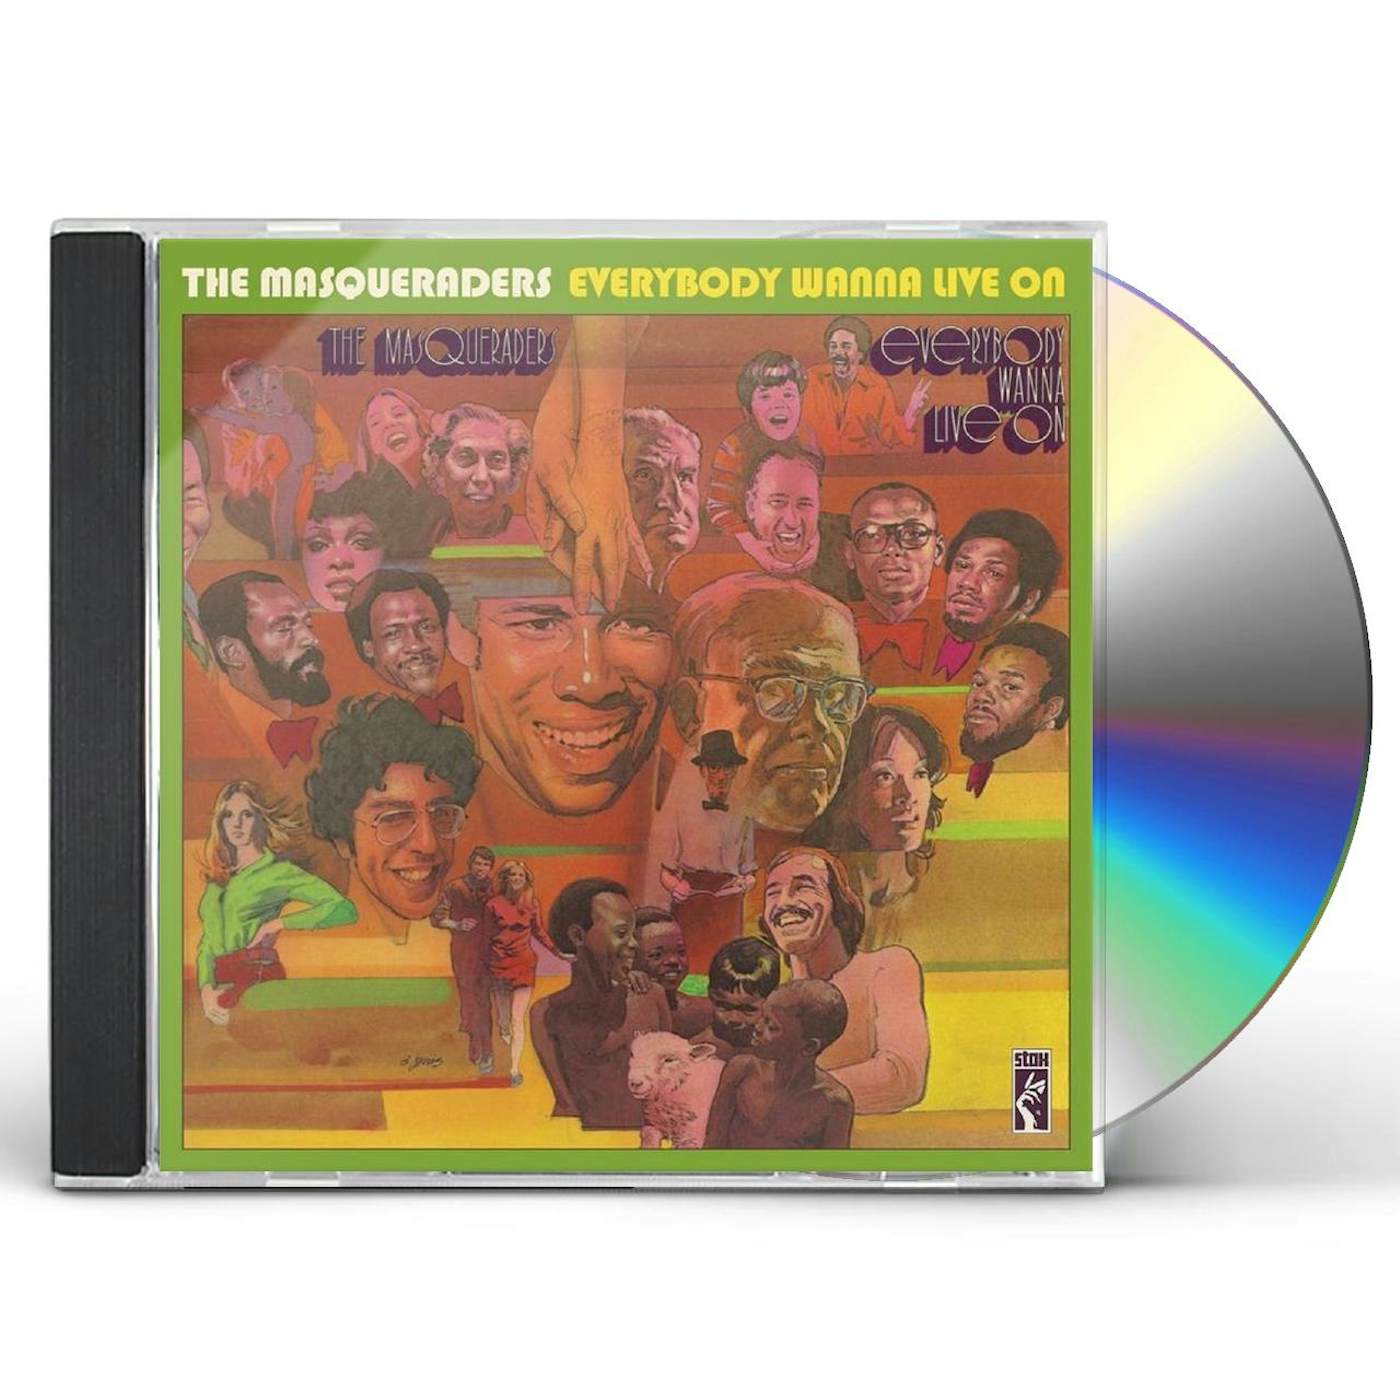 The Masqueraders EVERYBODY WANNA LIVE ON CD